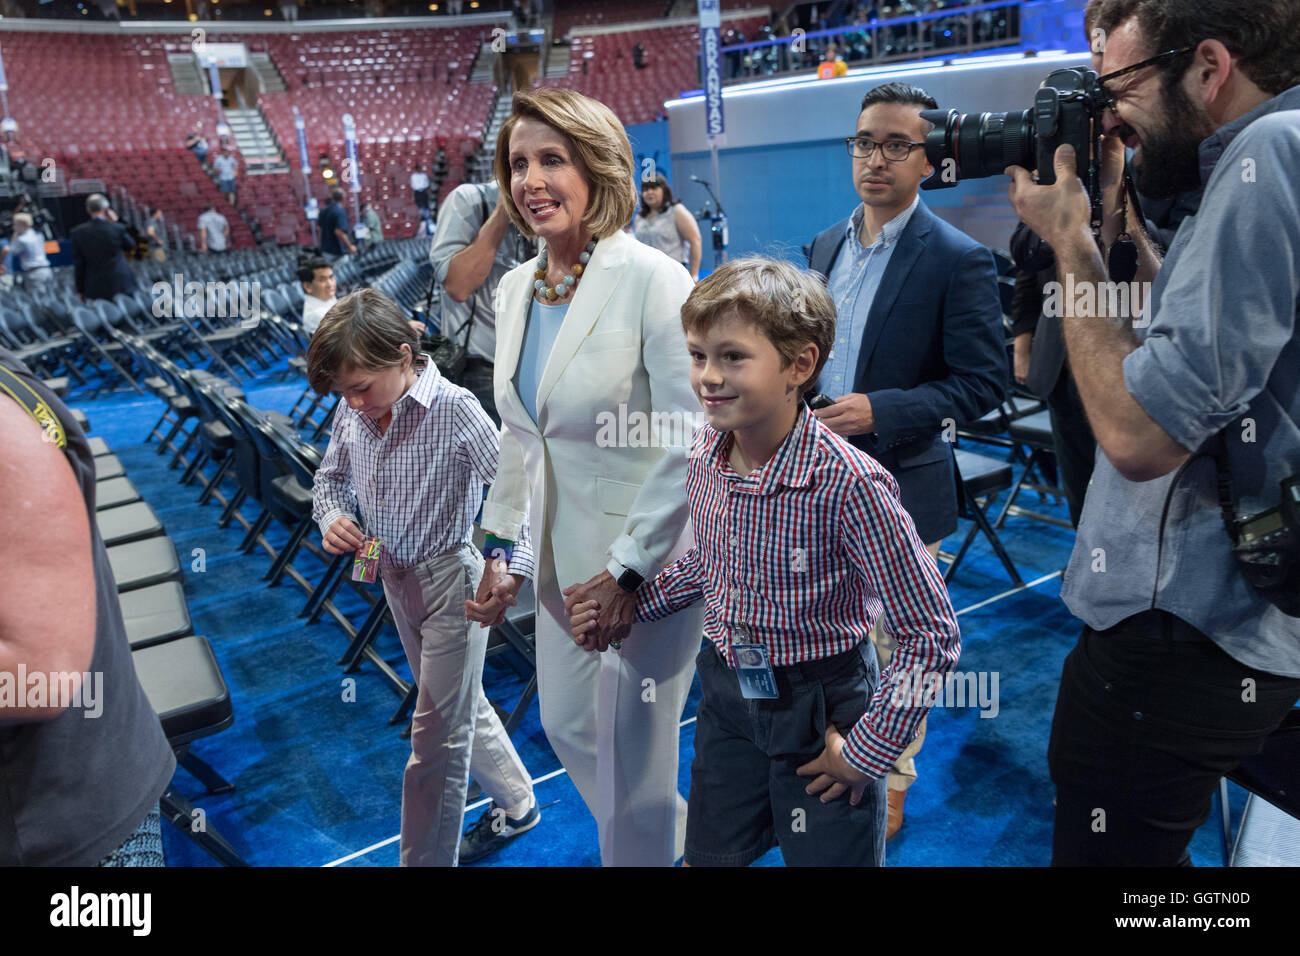 House minority leader Nancy Pelosi walks through the Wells Fargo Arena with her grandchildren a day before the start of the Democratic National Convention July 24, 2016 in Philadelphia, Pennsylvania. Stock Photo